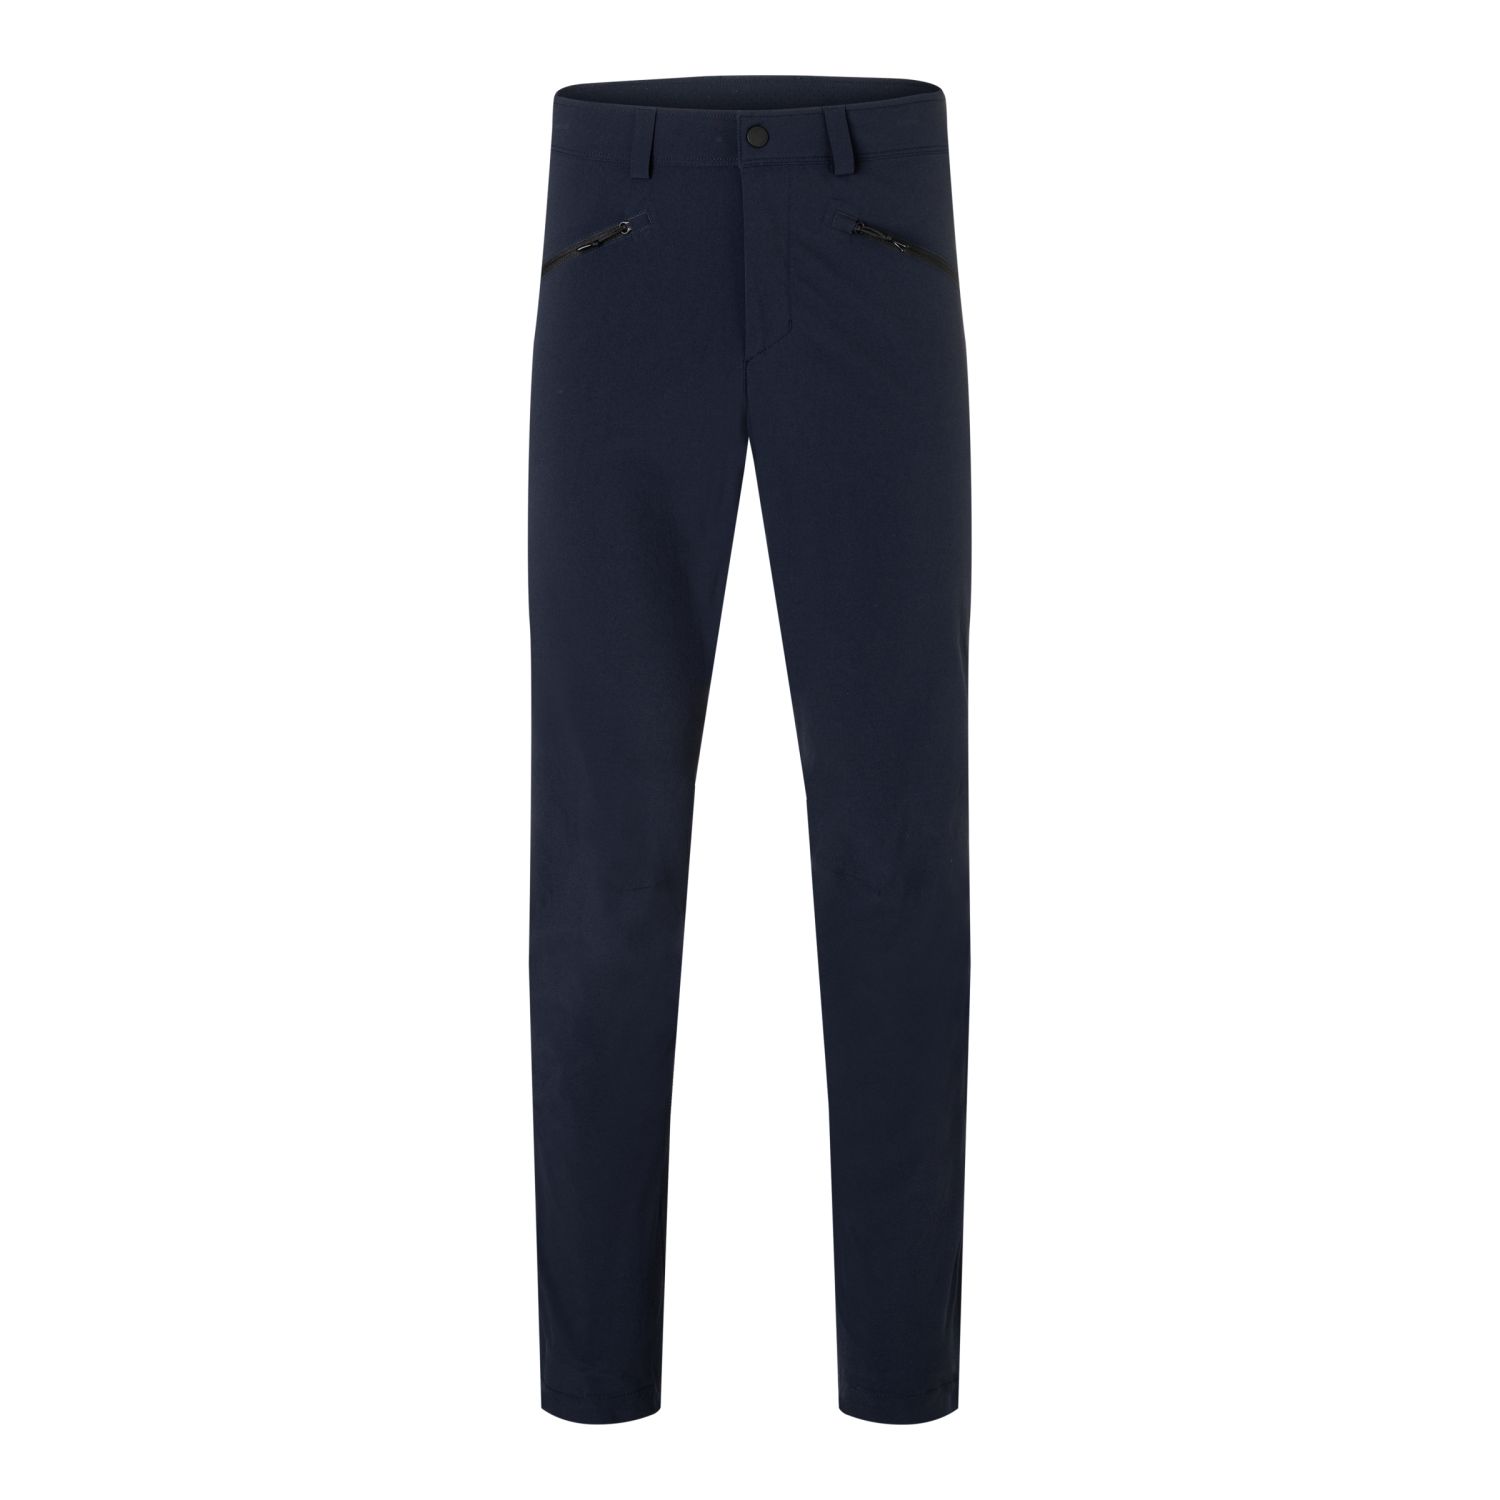 Joggers & Sweatpants -  bogner fire and ice BARLEY Functional Trousers